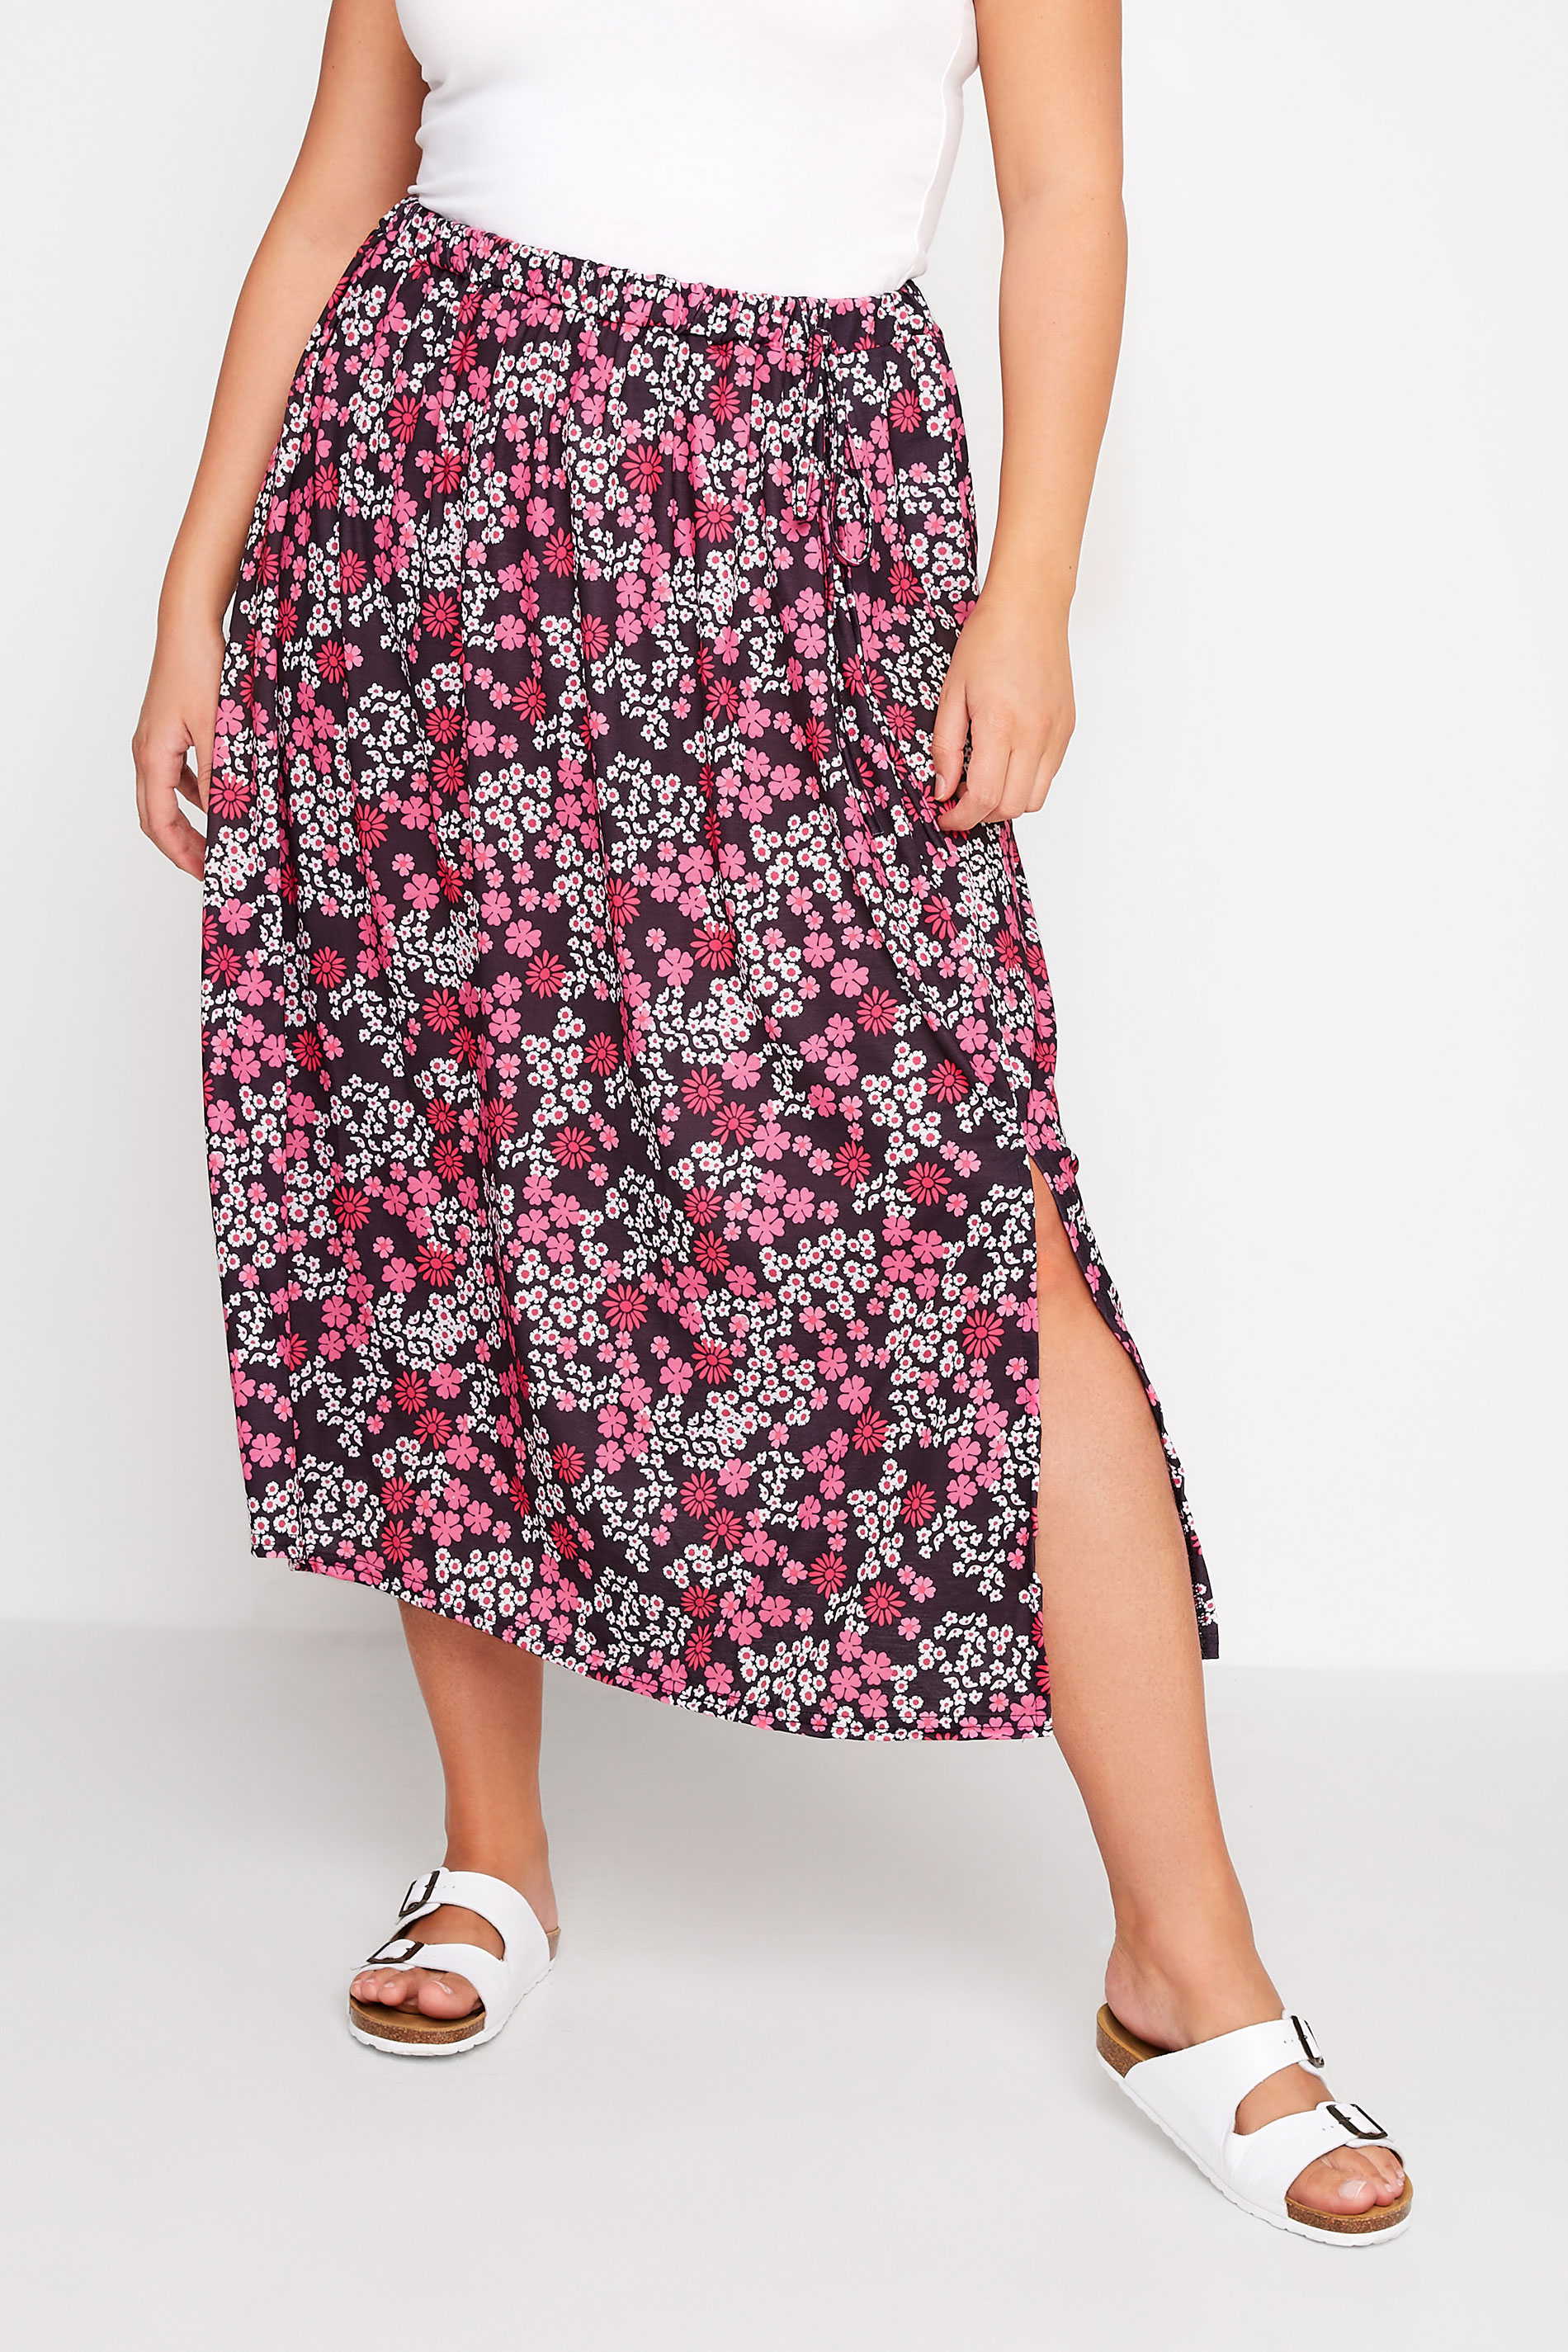 LIMITED COLLECTION Plus Size Pink Floral Midaxi Skirt | Yours Clothing 1